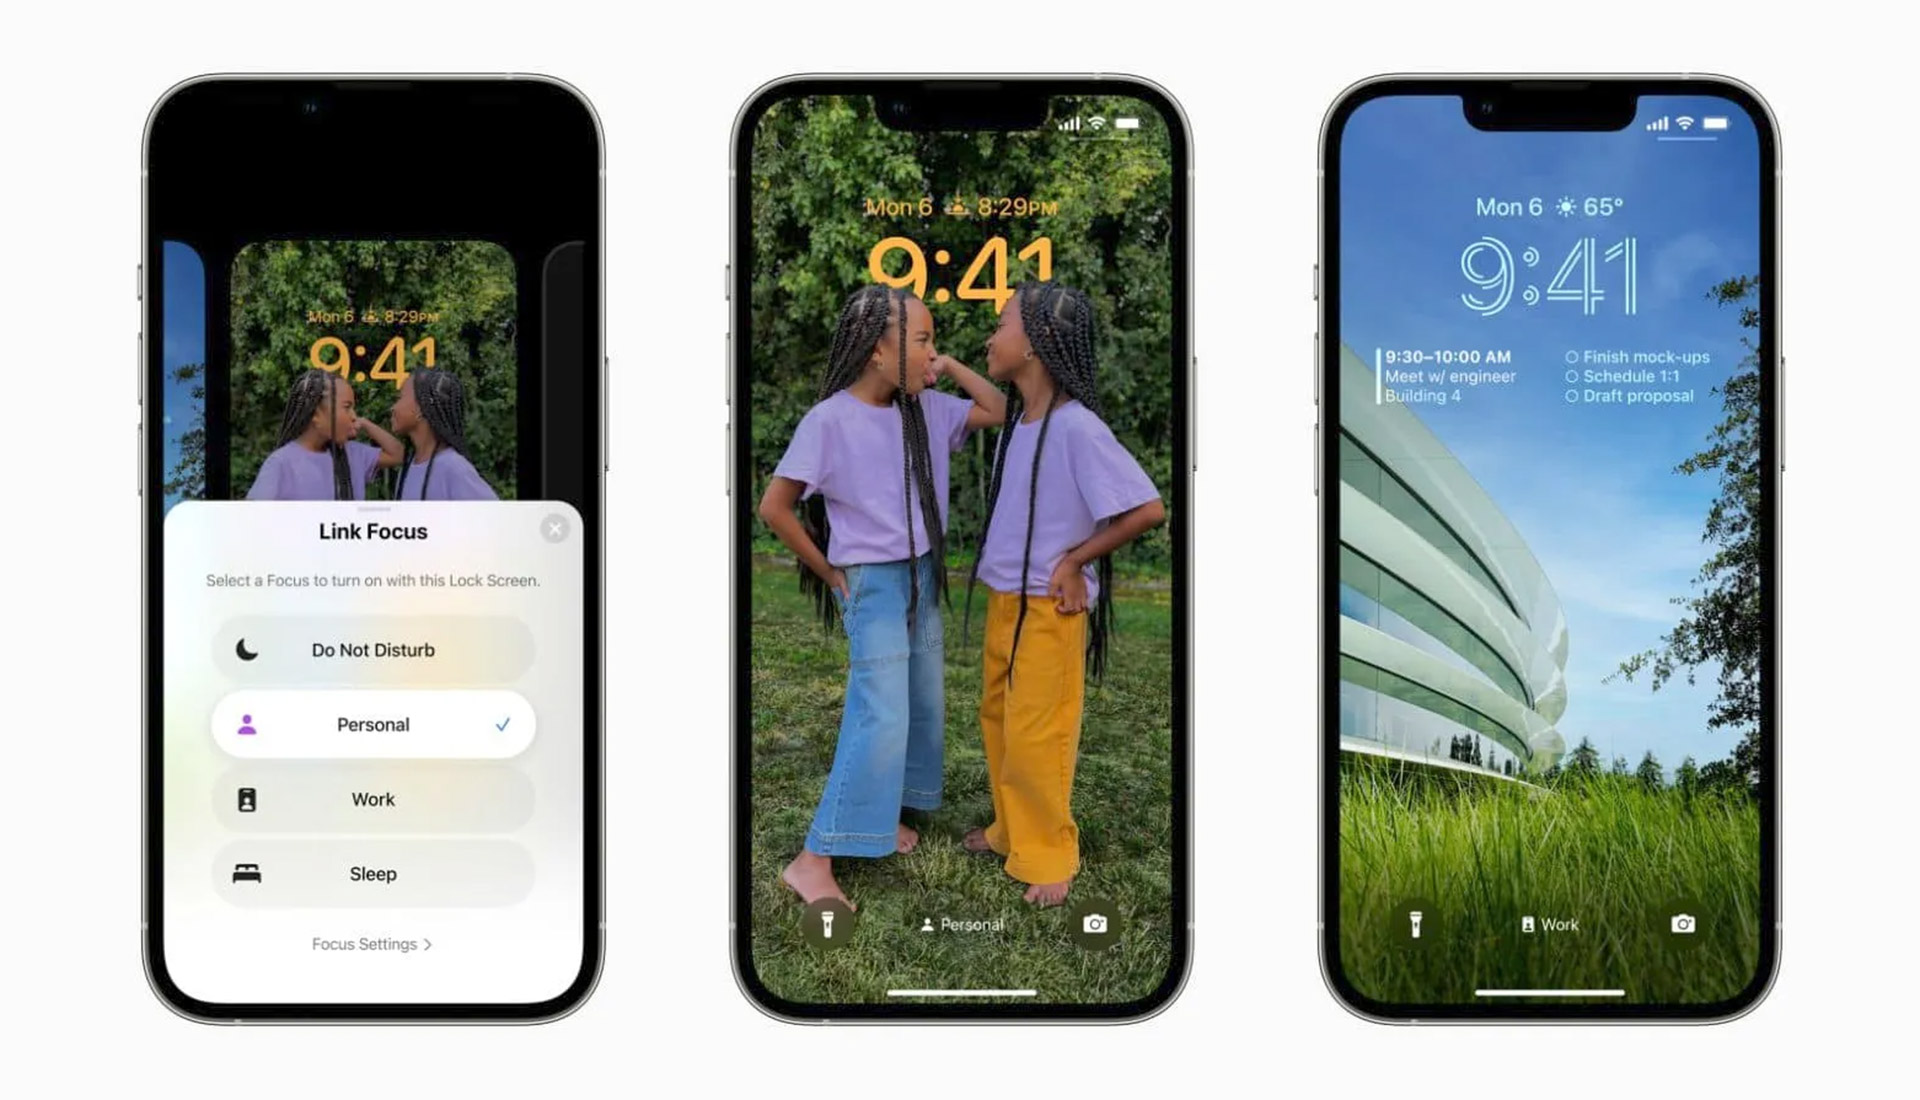 More personalization Focus on iOS 16